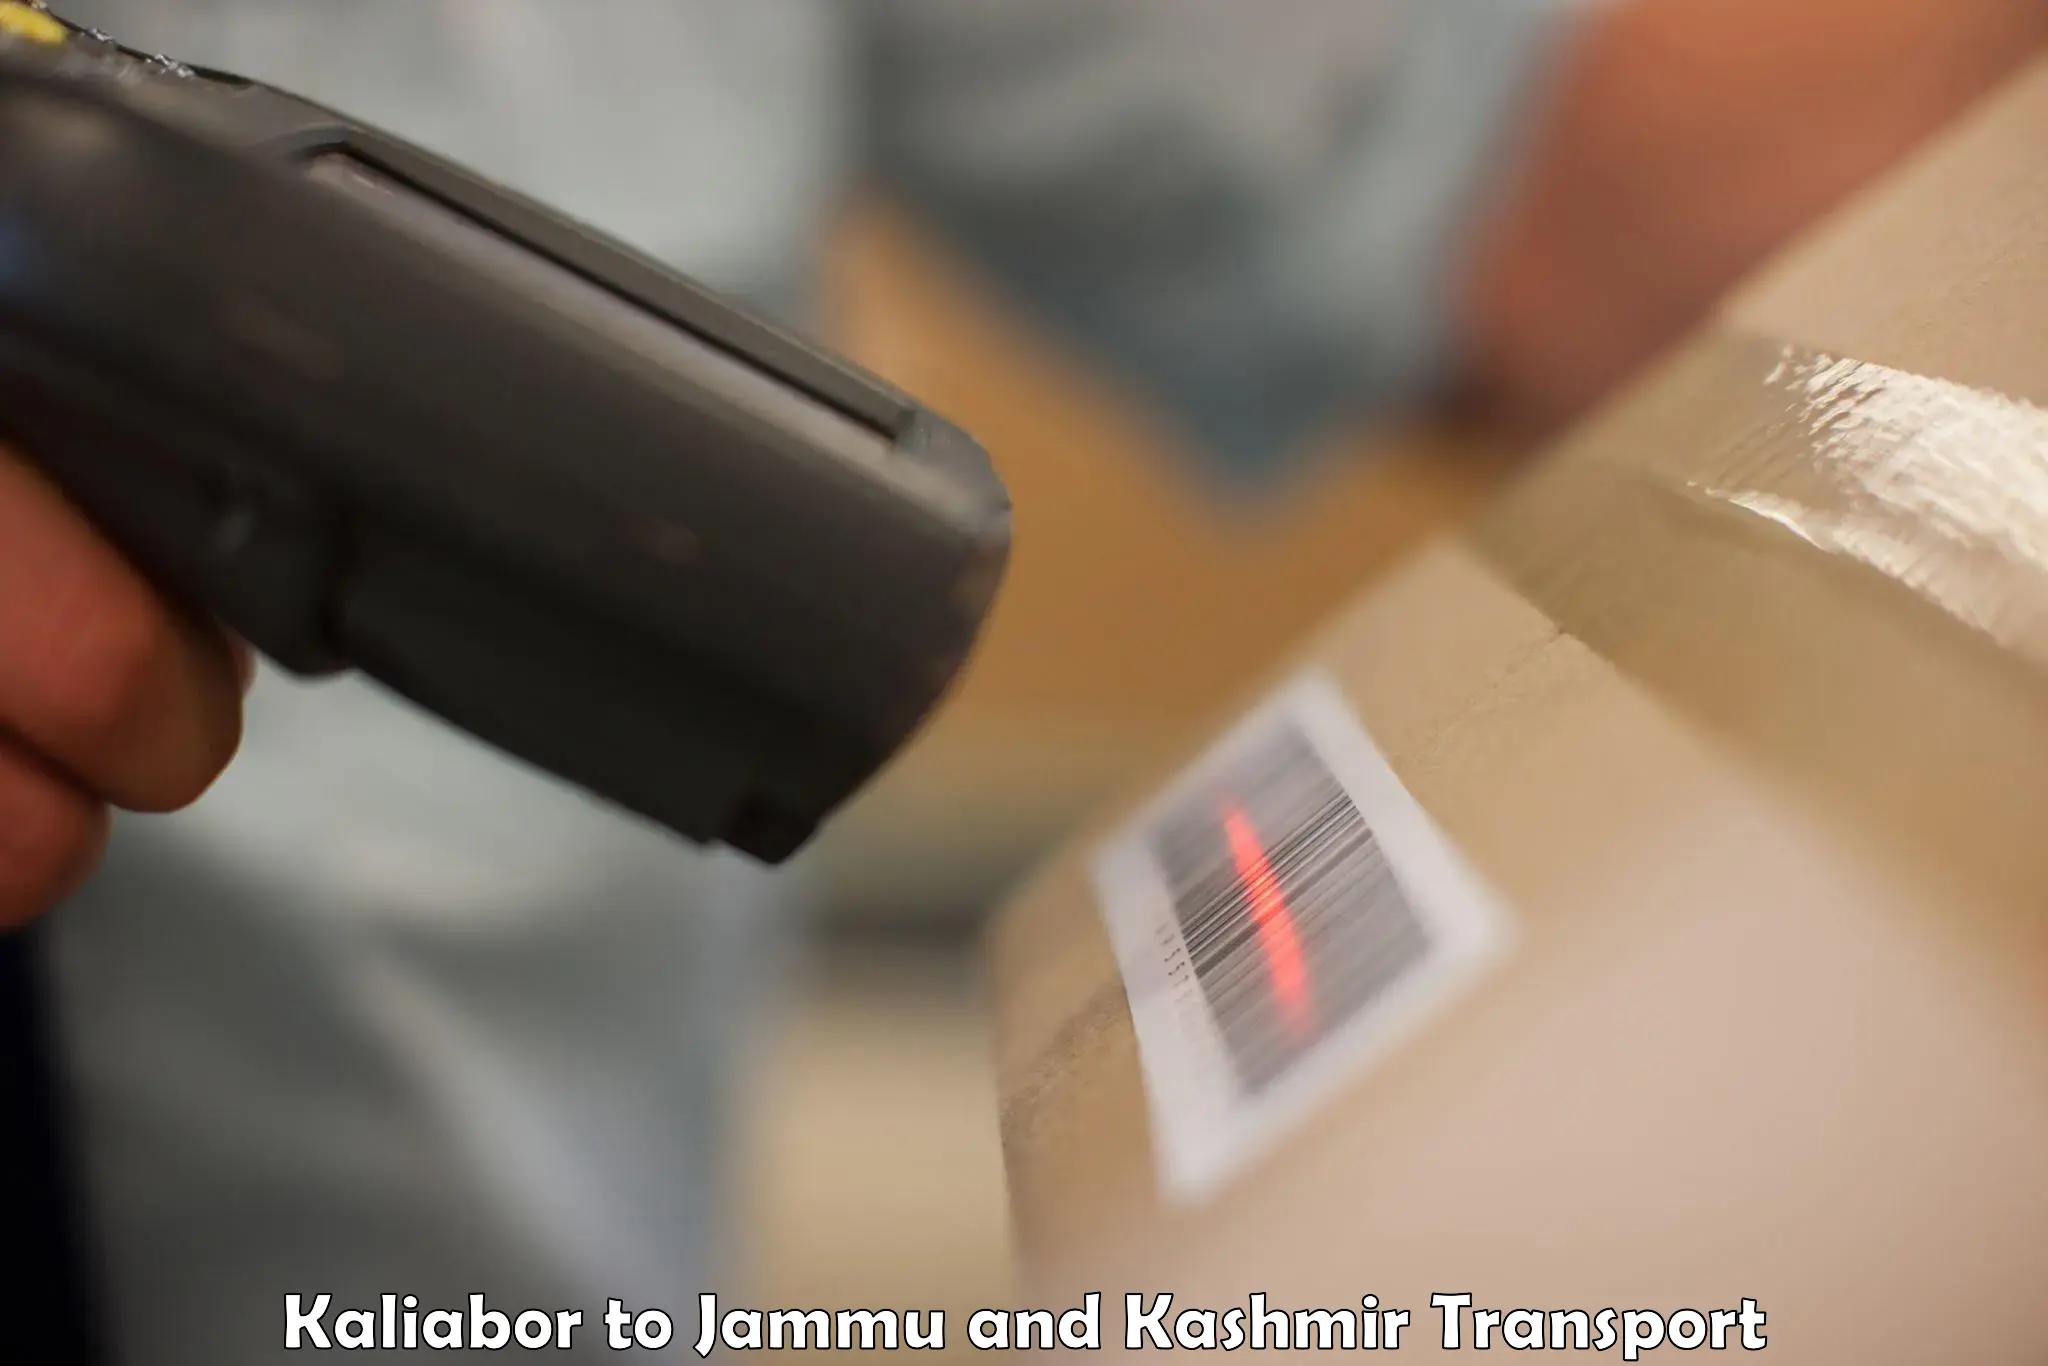 Air freight transport services Kaliabor to Jammu and Kashmir